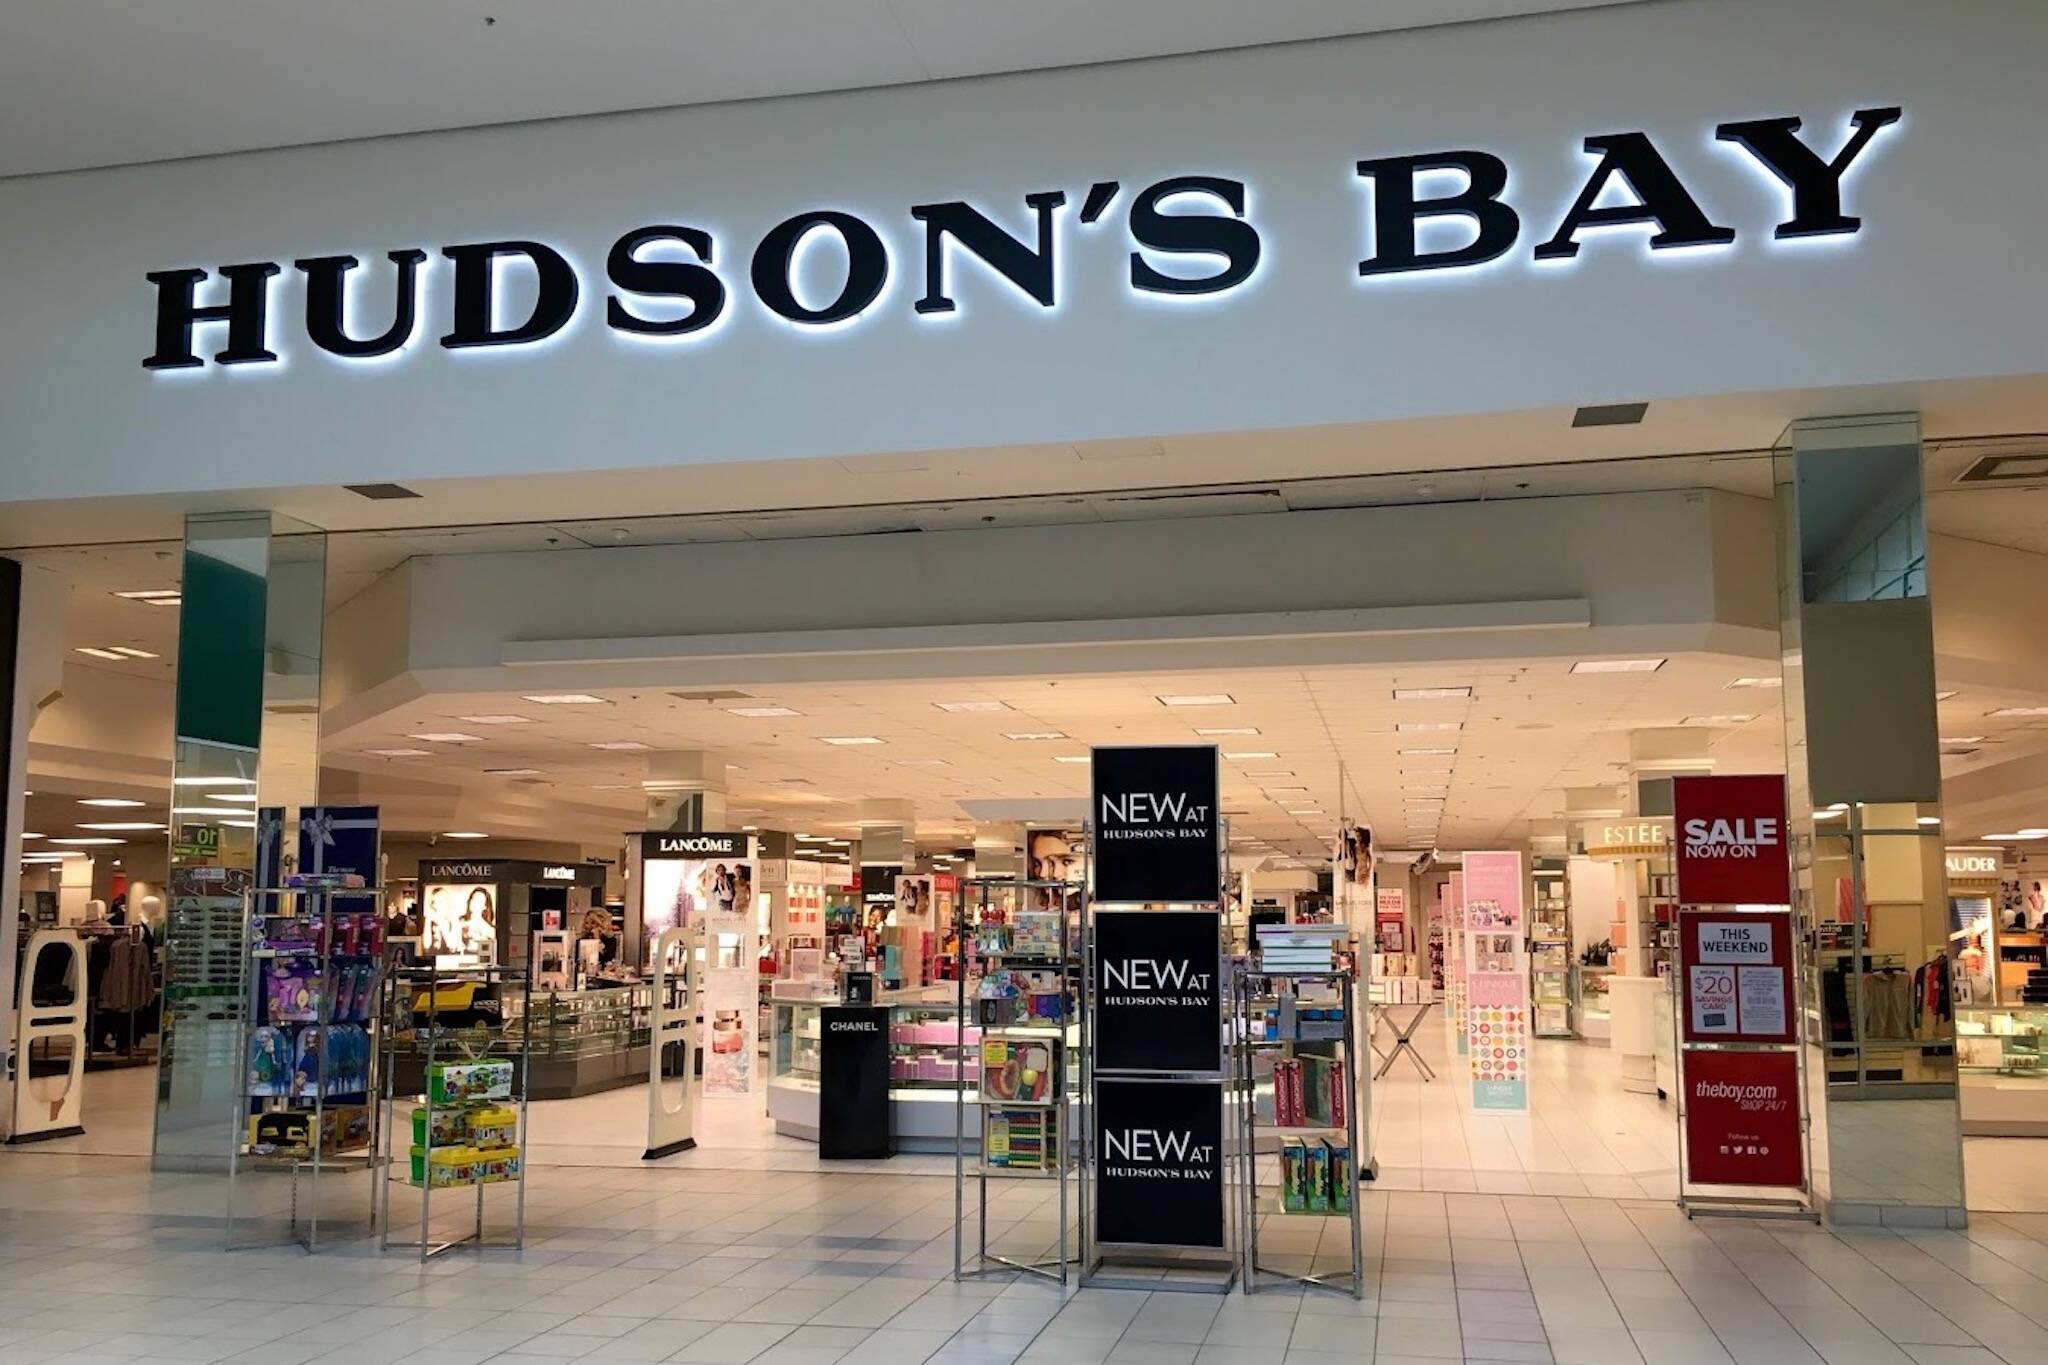 Hudson's Bay is one of the best places to shop in Toronto